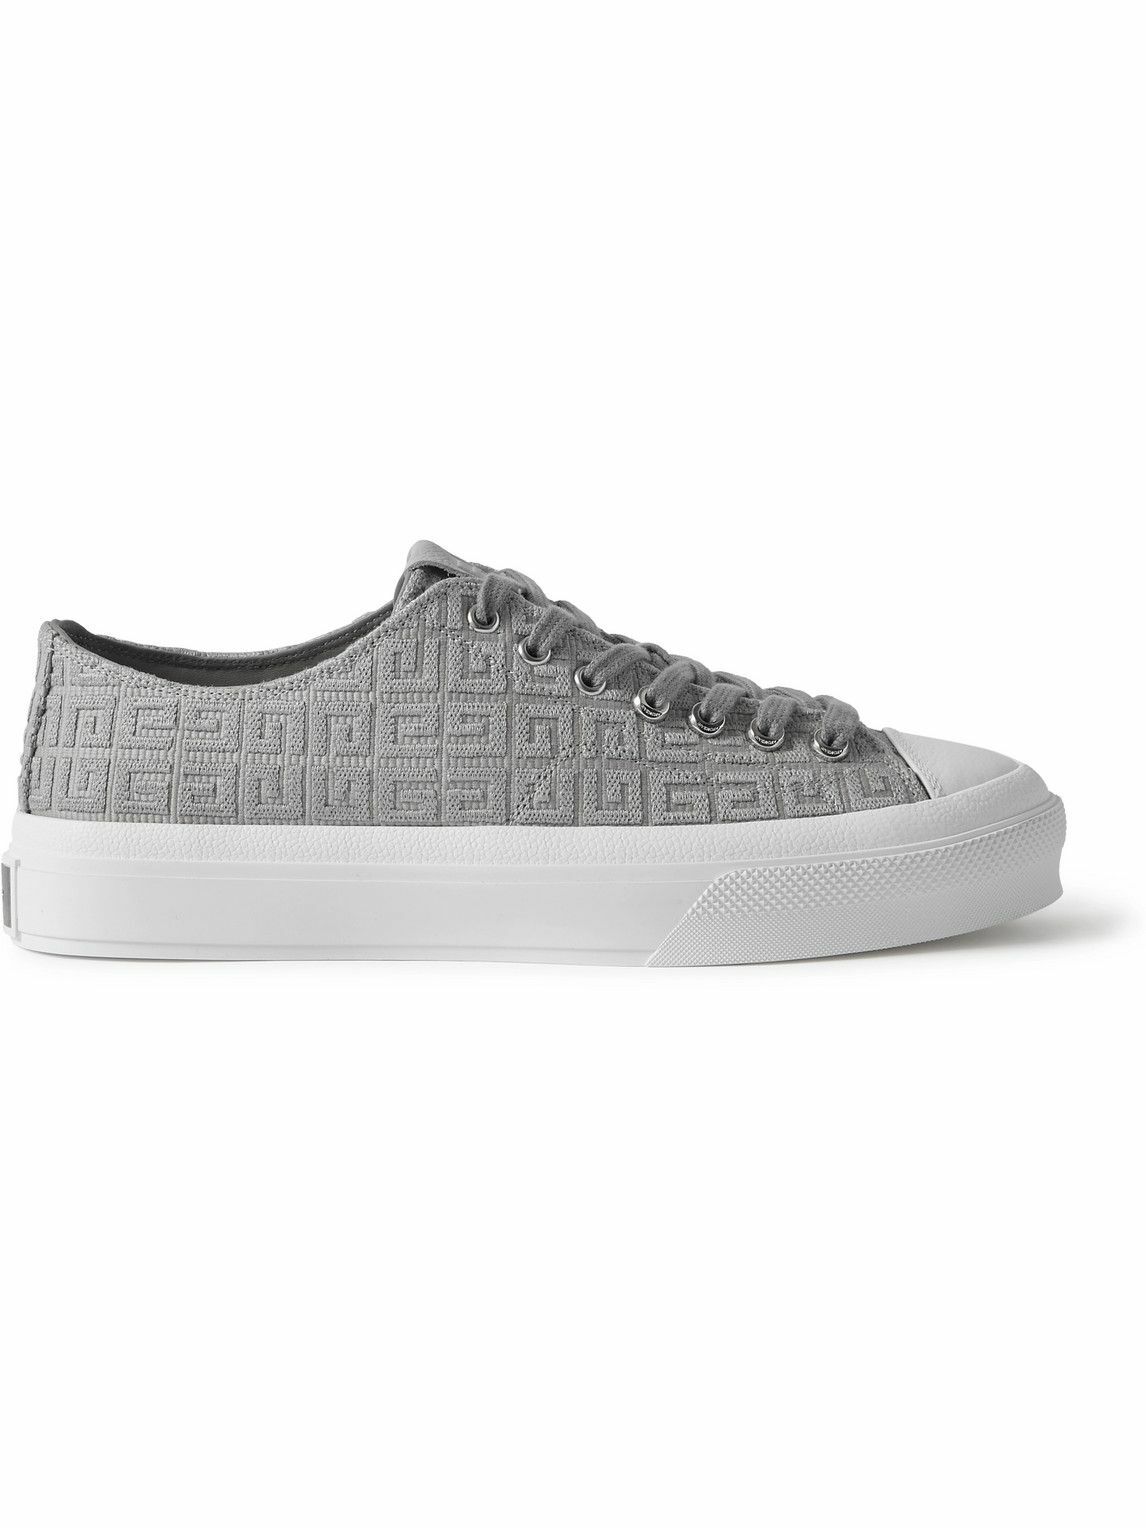 Givenchy - City Leather-Trimmed Logo-Jacquard Sneakers - Gray Givenchy